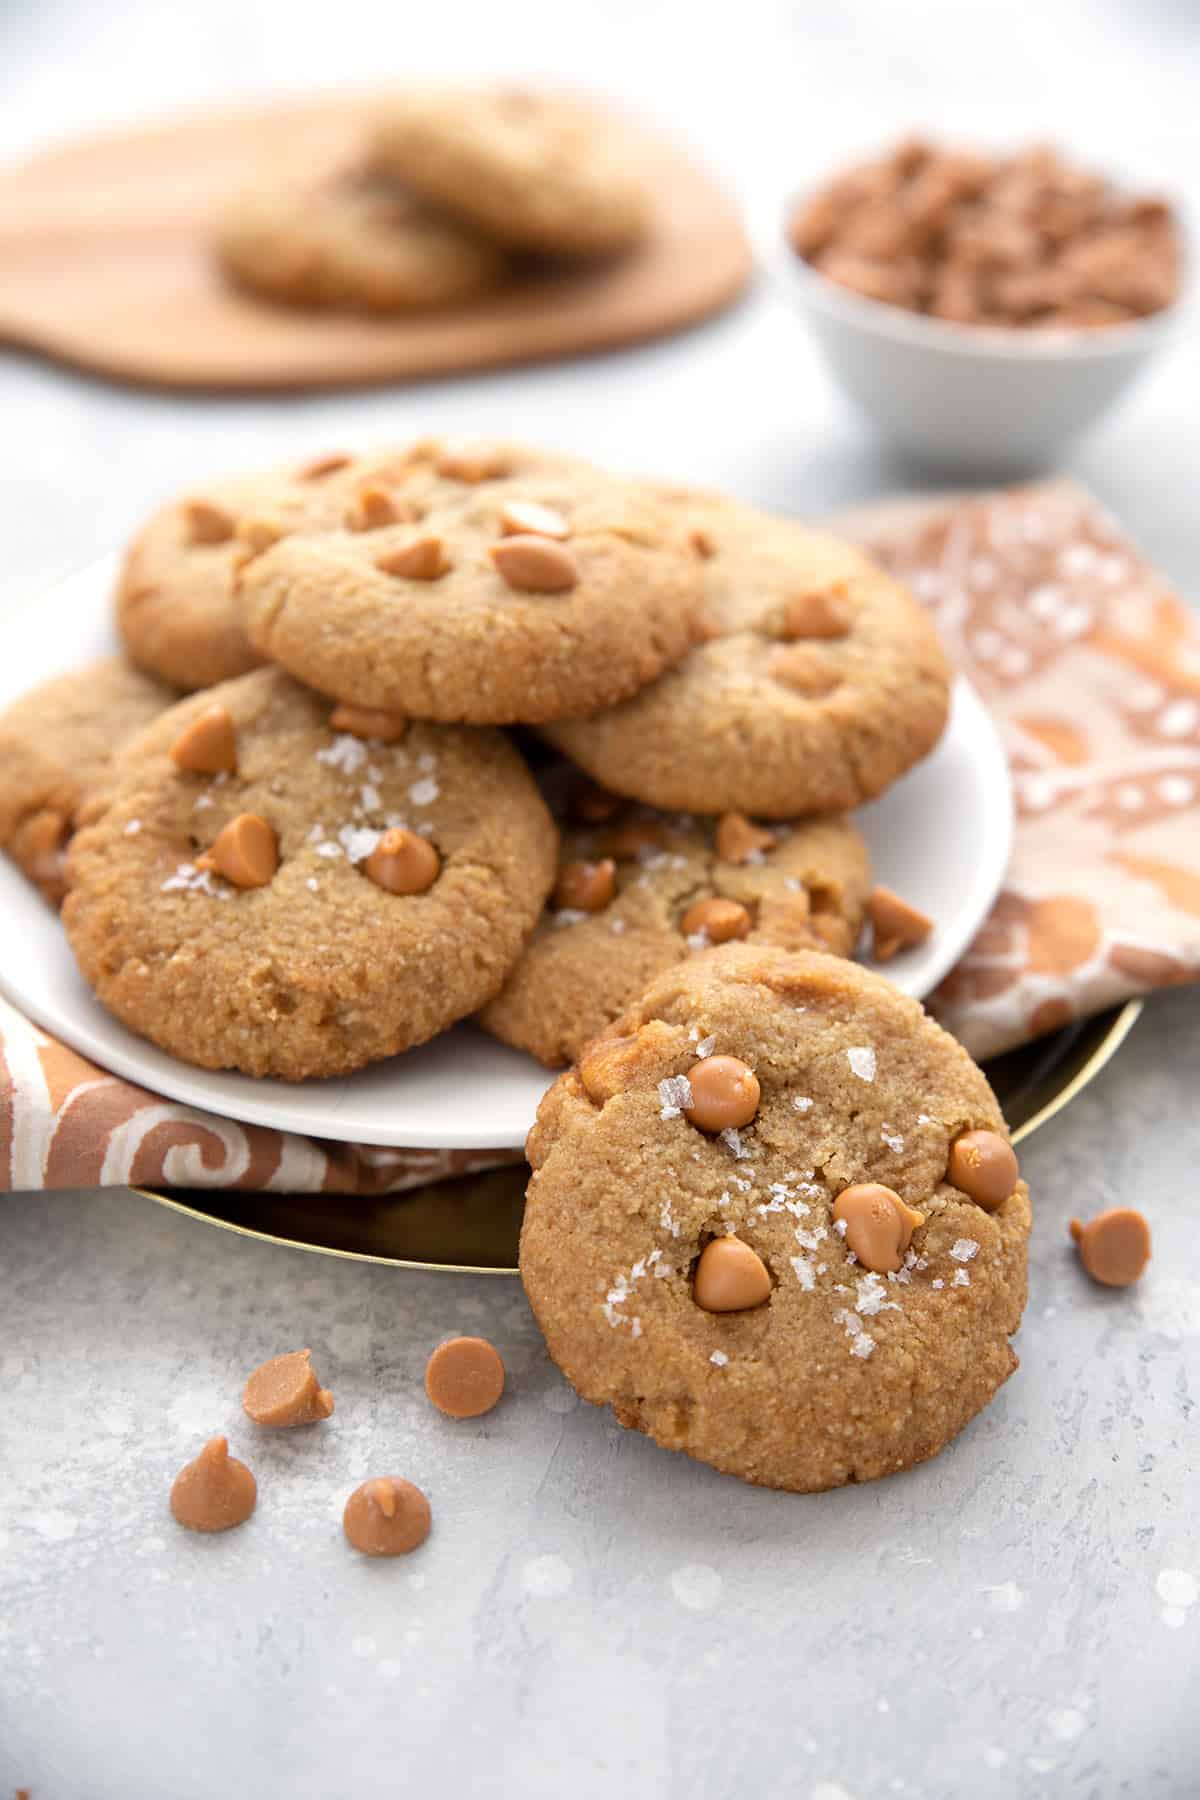 Keto Butterscotch Cookies on a white plate with one cookie in front and some butterscotch chips strewn around.